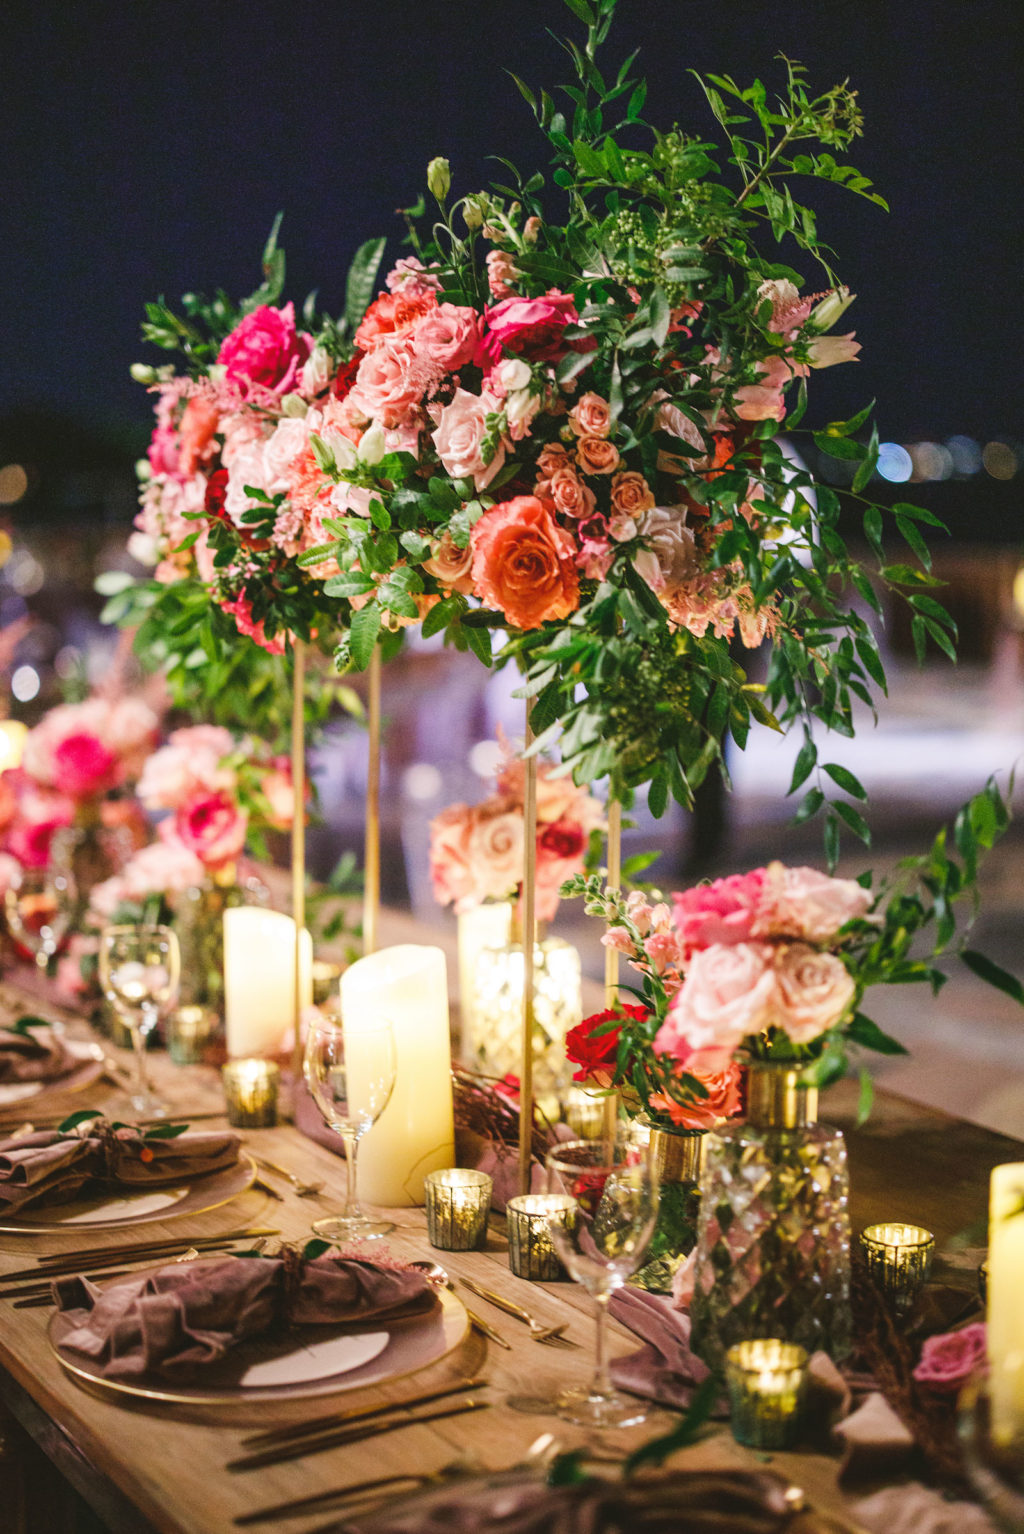 Luxury Elegant Tampa Wedding Reception with Long Feasting Tables featuring Tall Colorful Peach, Blush Pink, Fuchsia and Orange Rose Centerpieces with Greenery and Candles